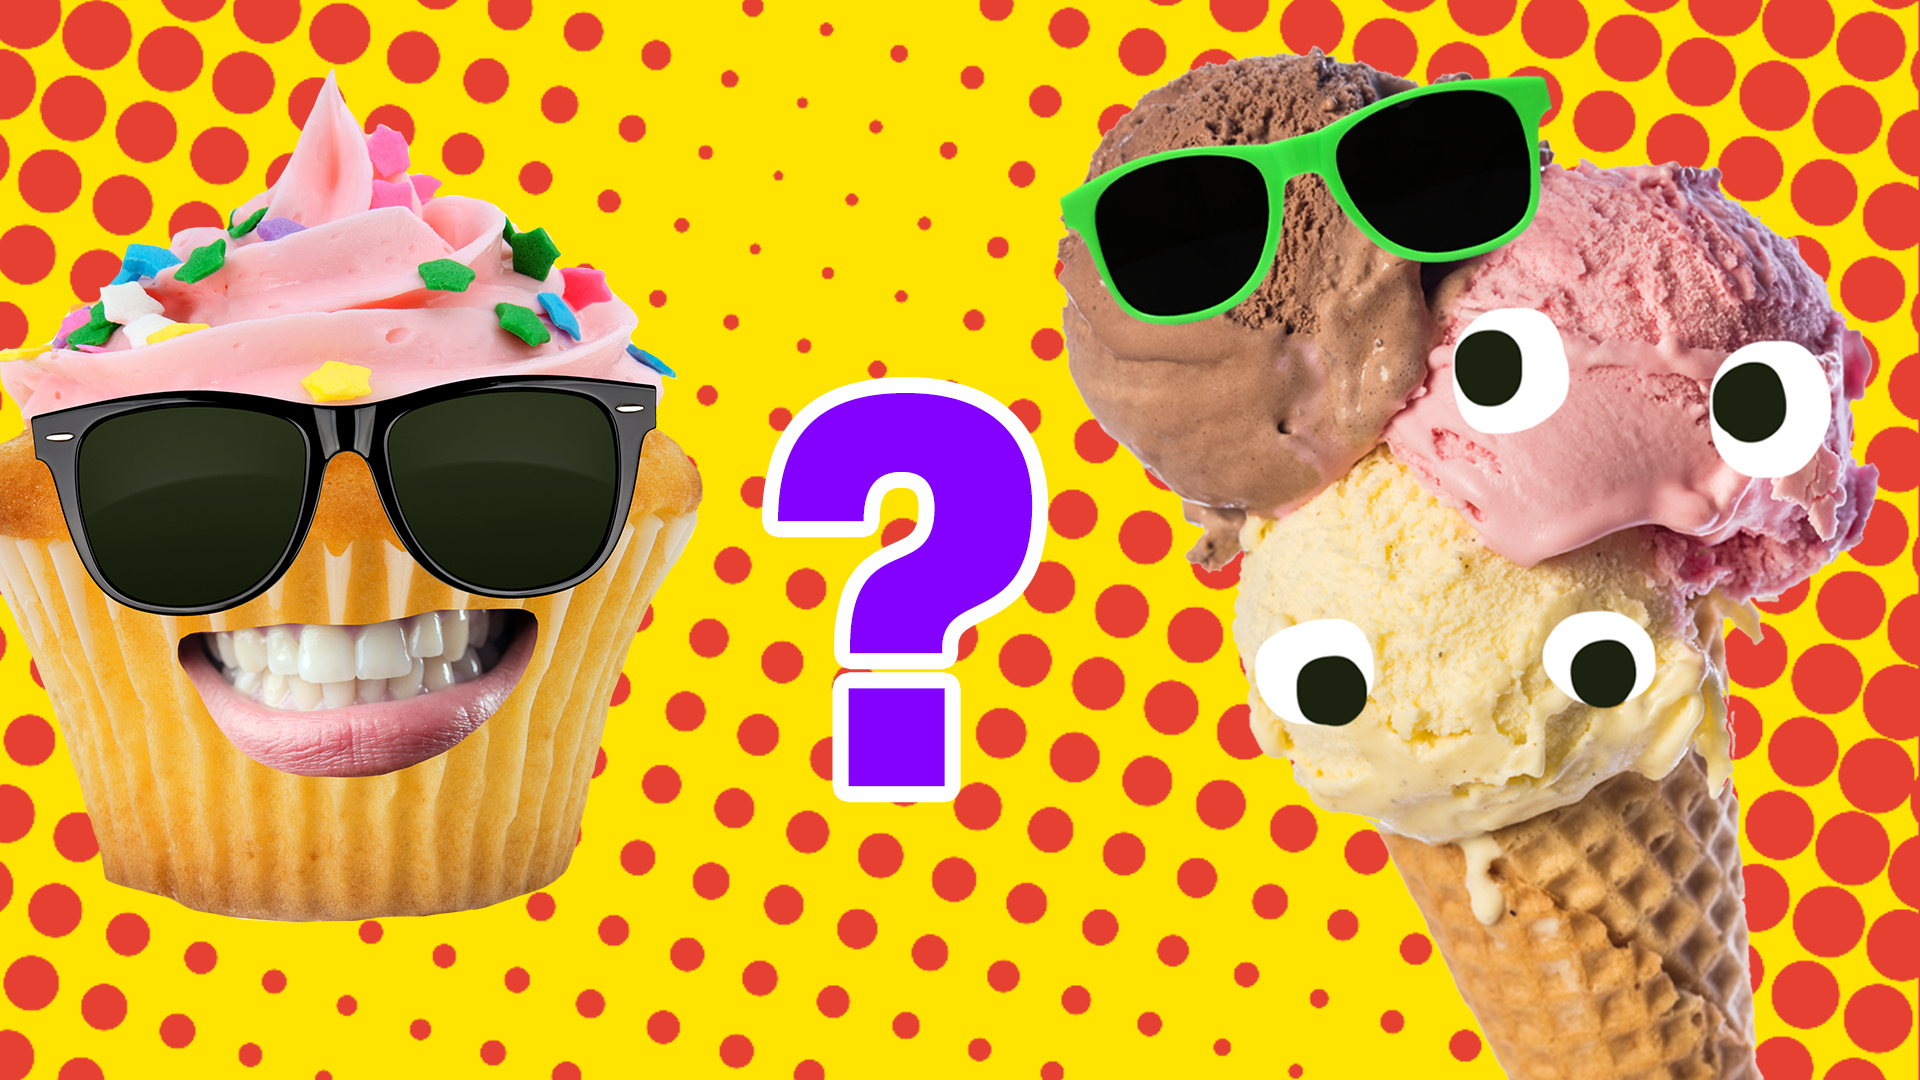 Cake and Icecream with faces on spotted background with blue question mark 